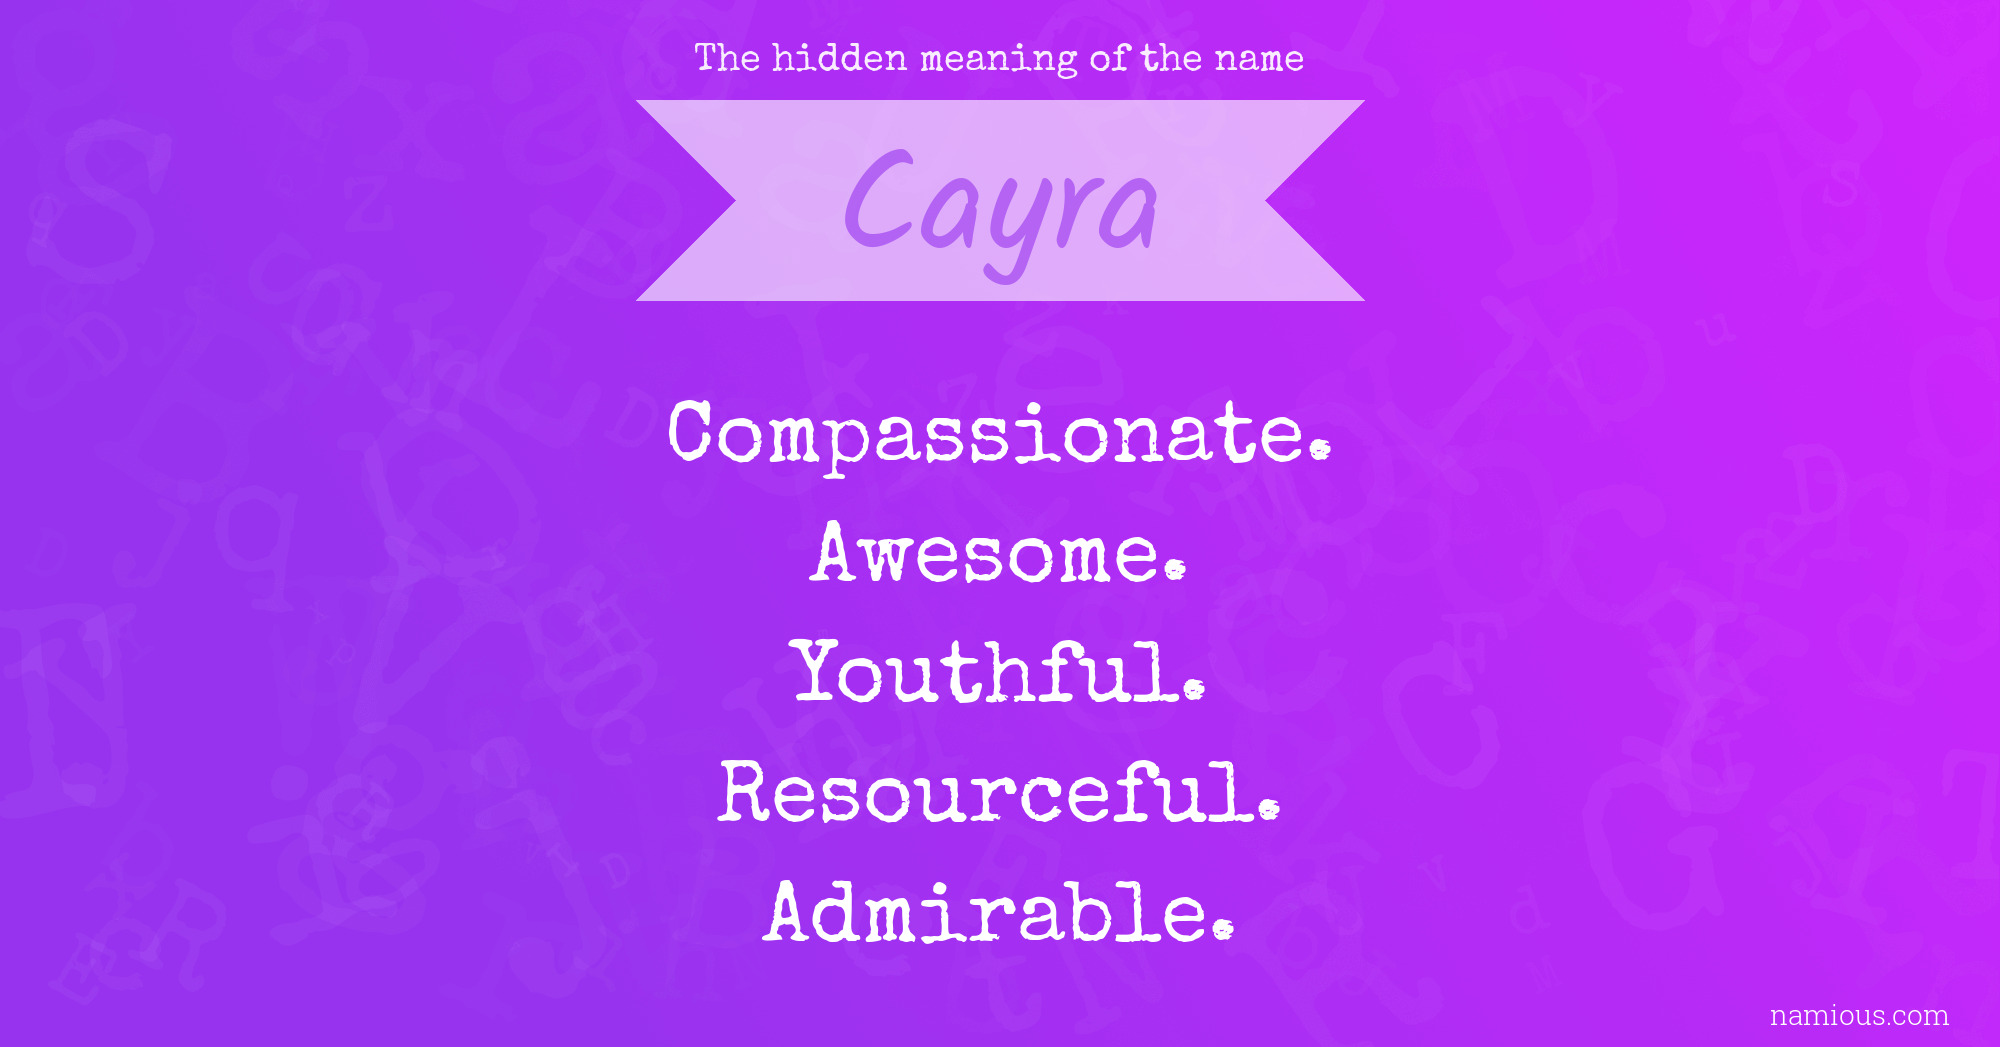 The hidden meaning of the name Cayra